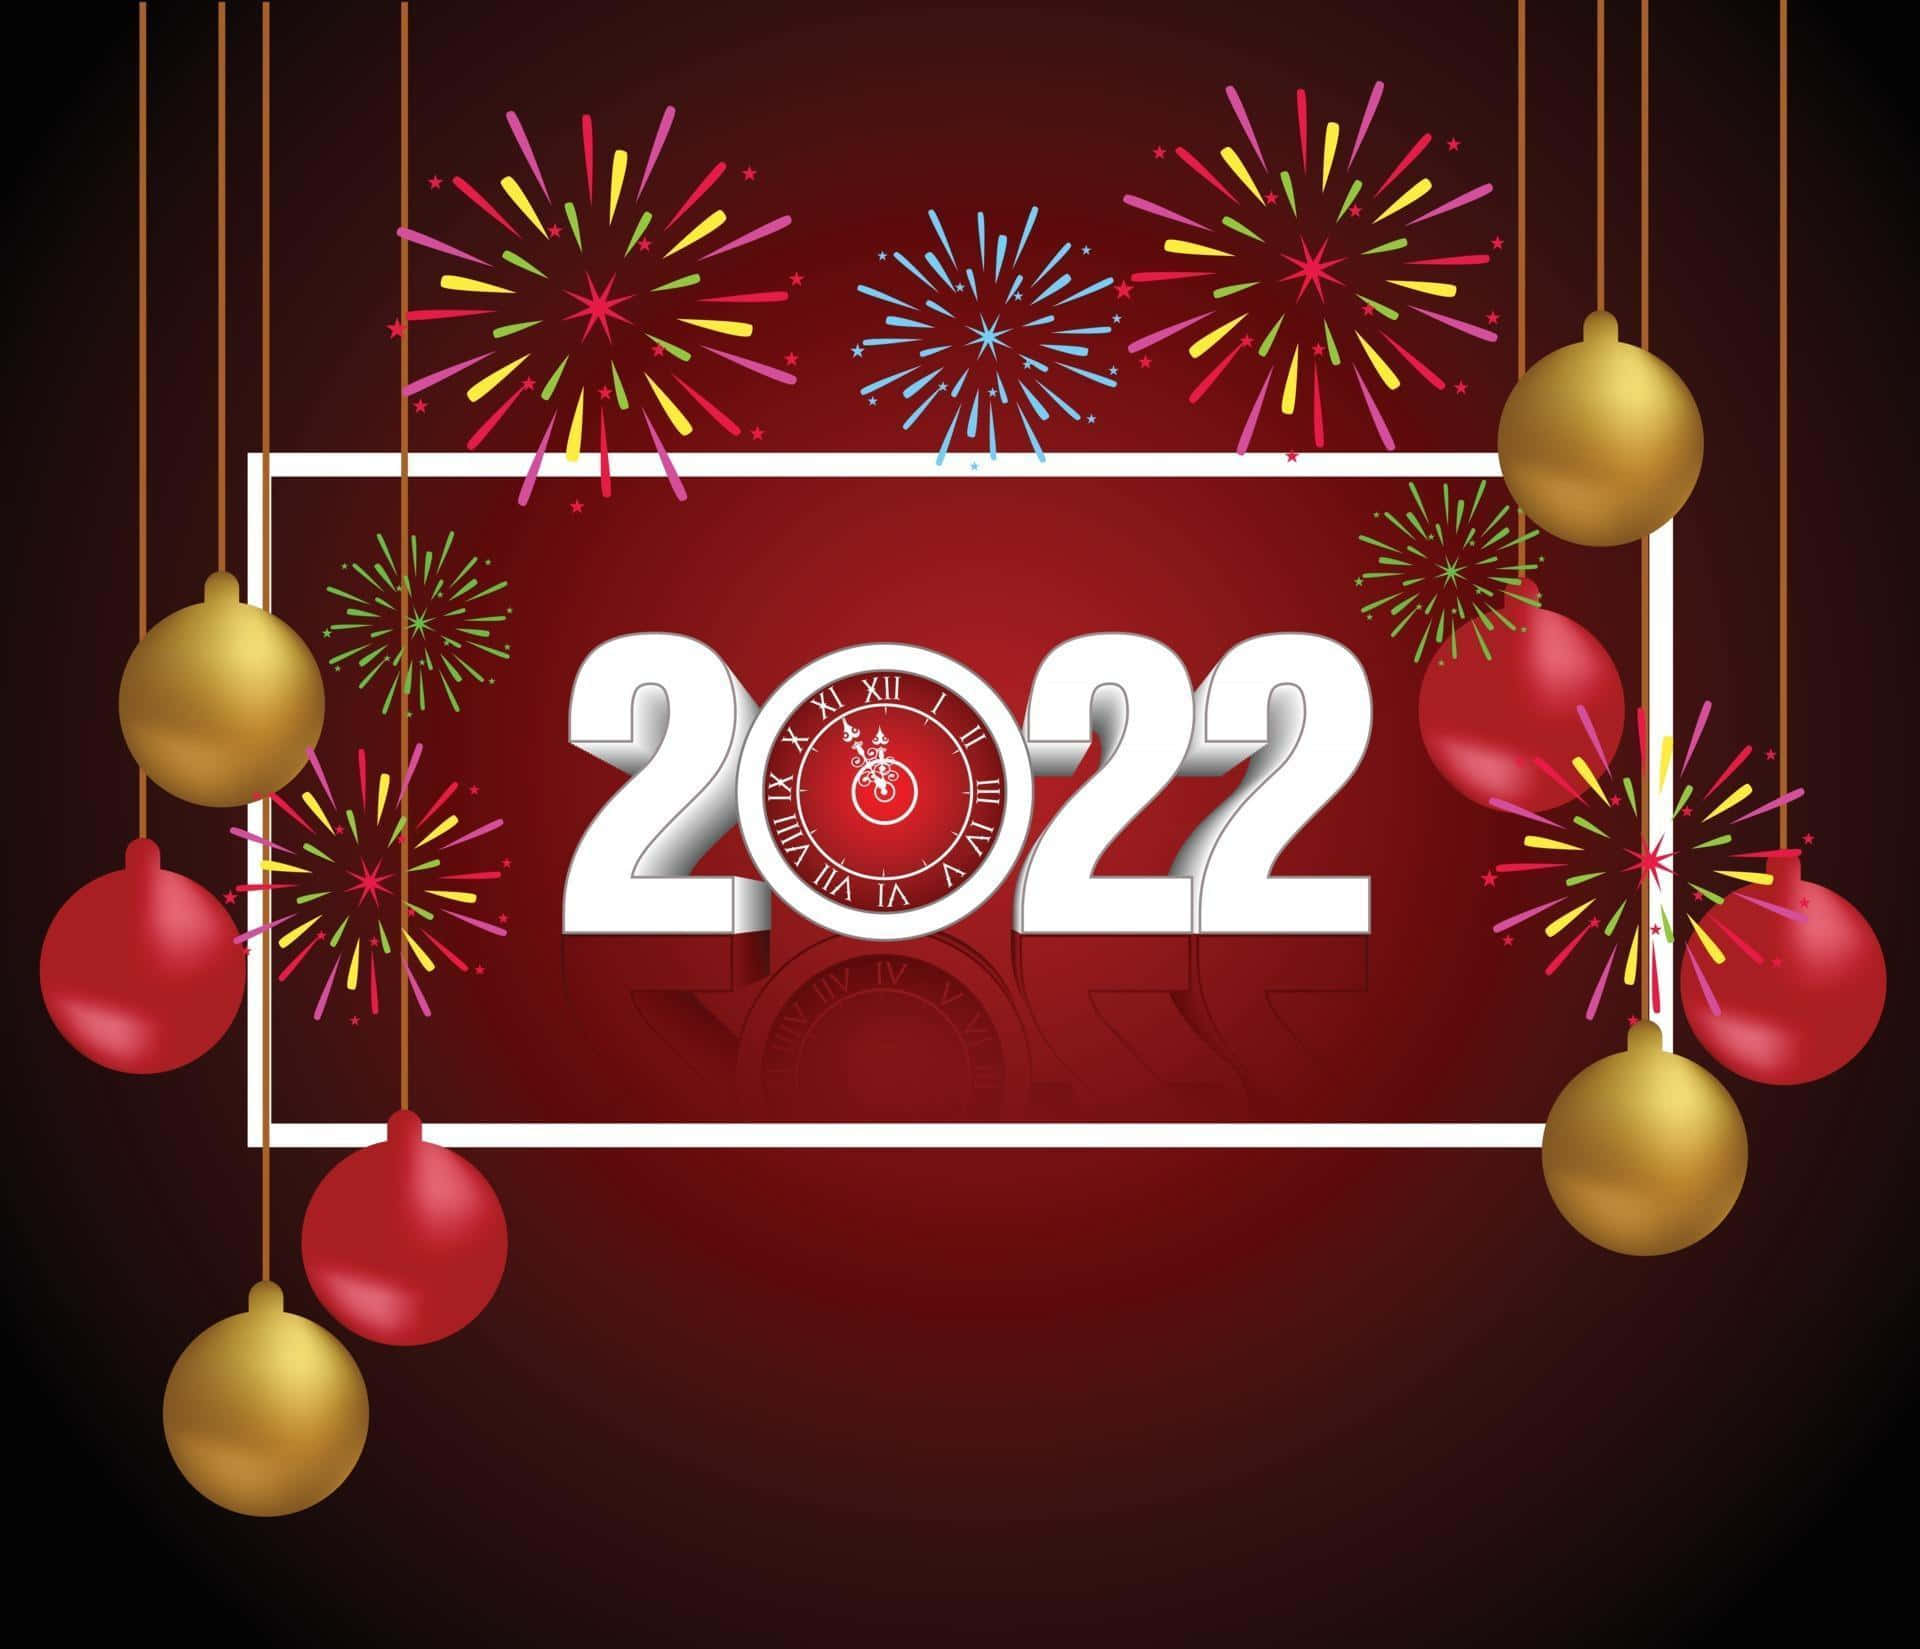 Download Celebrating the new year in 2022. | Wallpapers.com